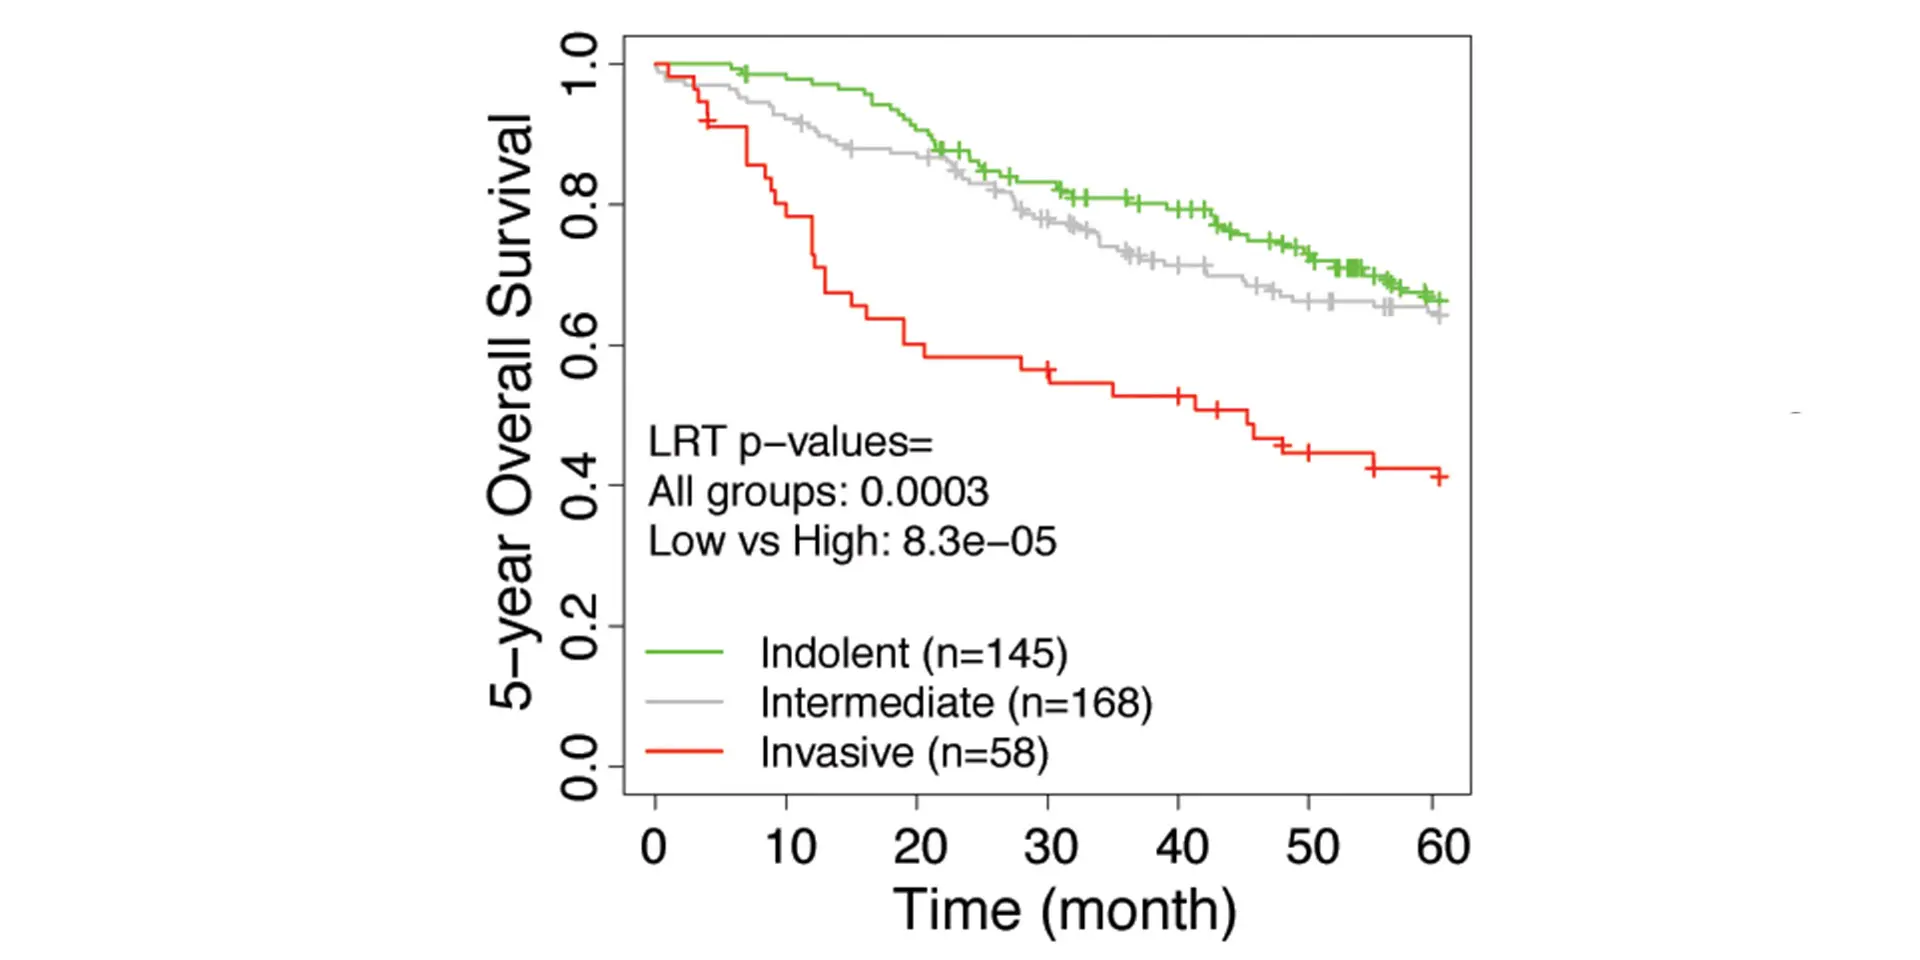 Stratification of tumor samples of each lung adenocarcinoma cohort into three groups based on IVS; invasive (high IVS), intermediate (middle IVS), and indolent (low IVS) tumors. Five-year survival of tumors was shown in a KM curve with corresponding LRT p-values.  a) Shedden et al